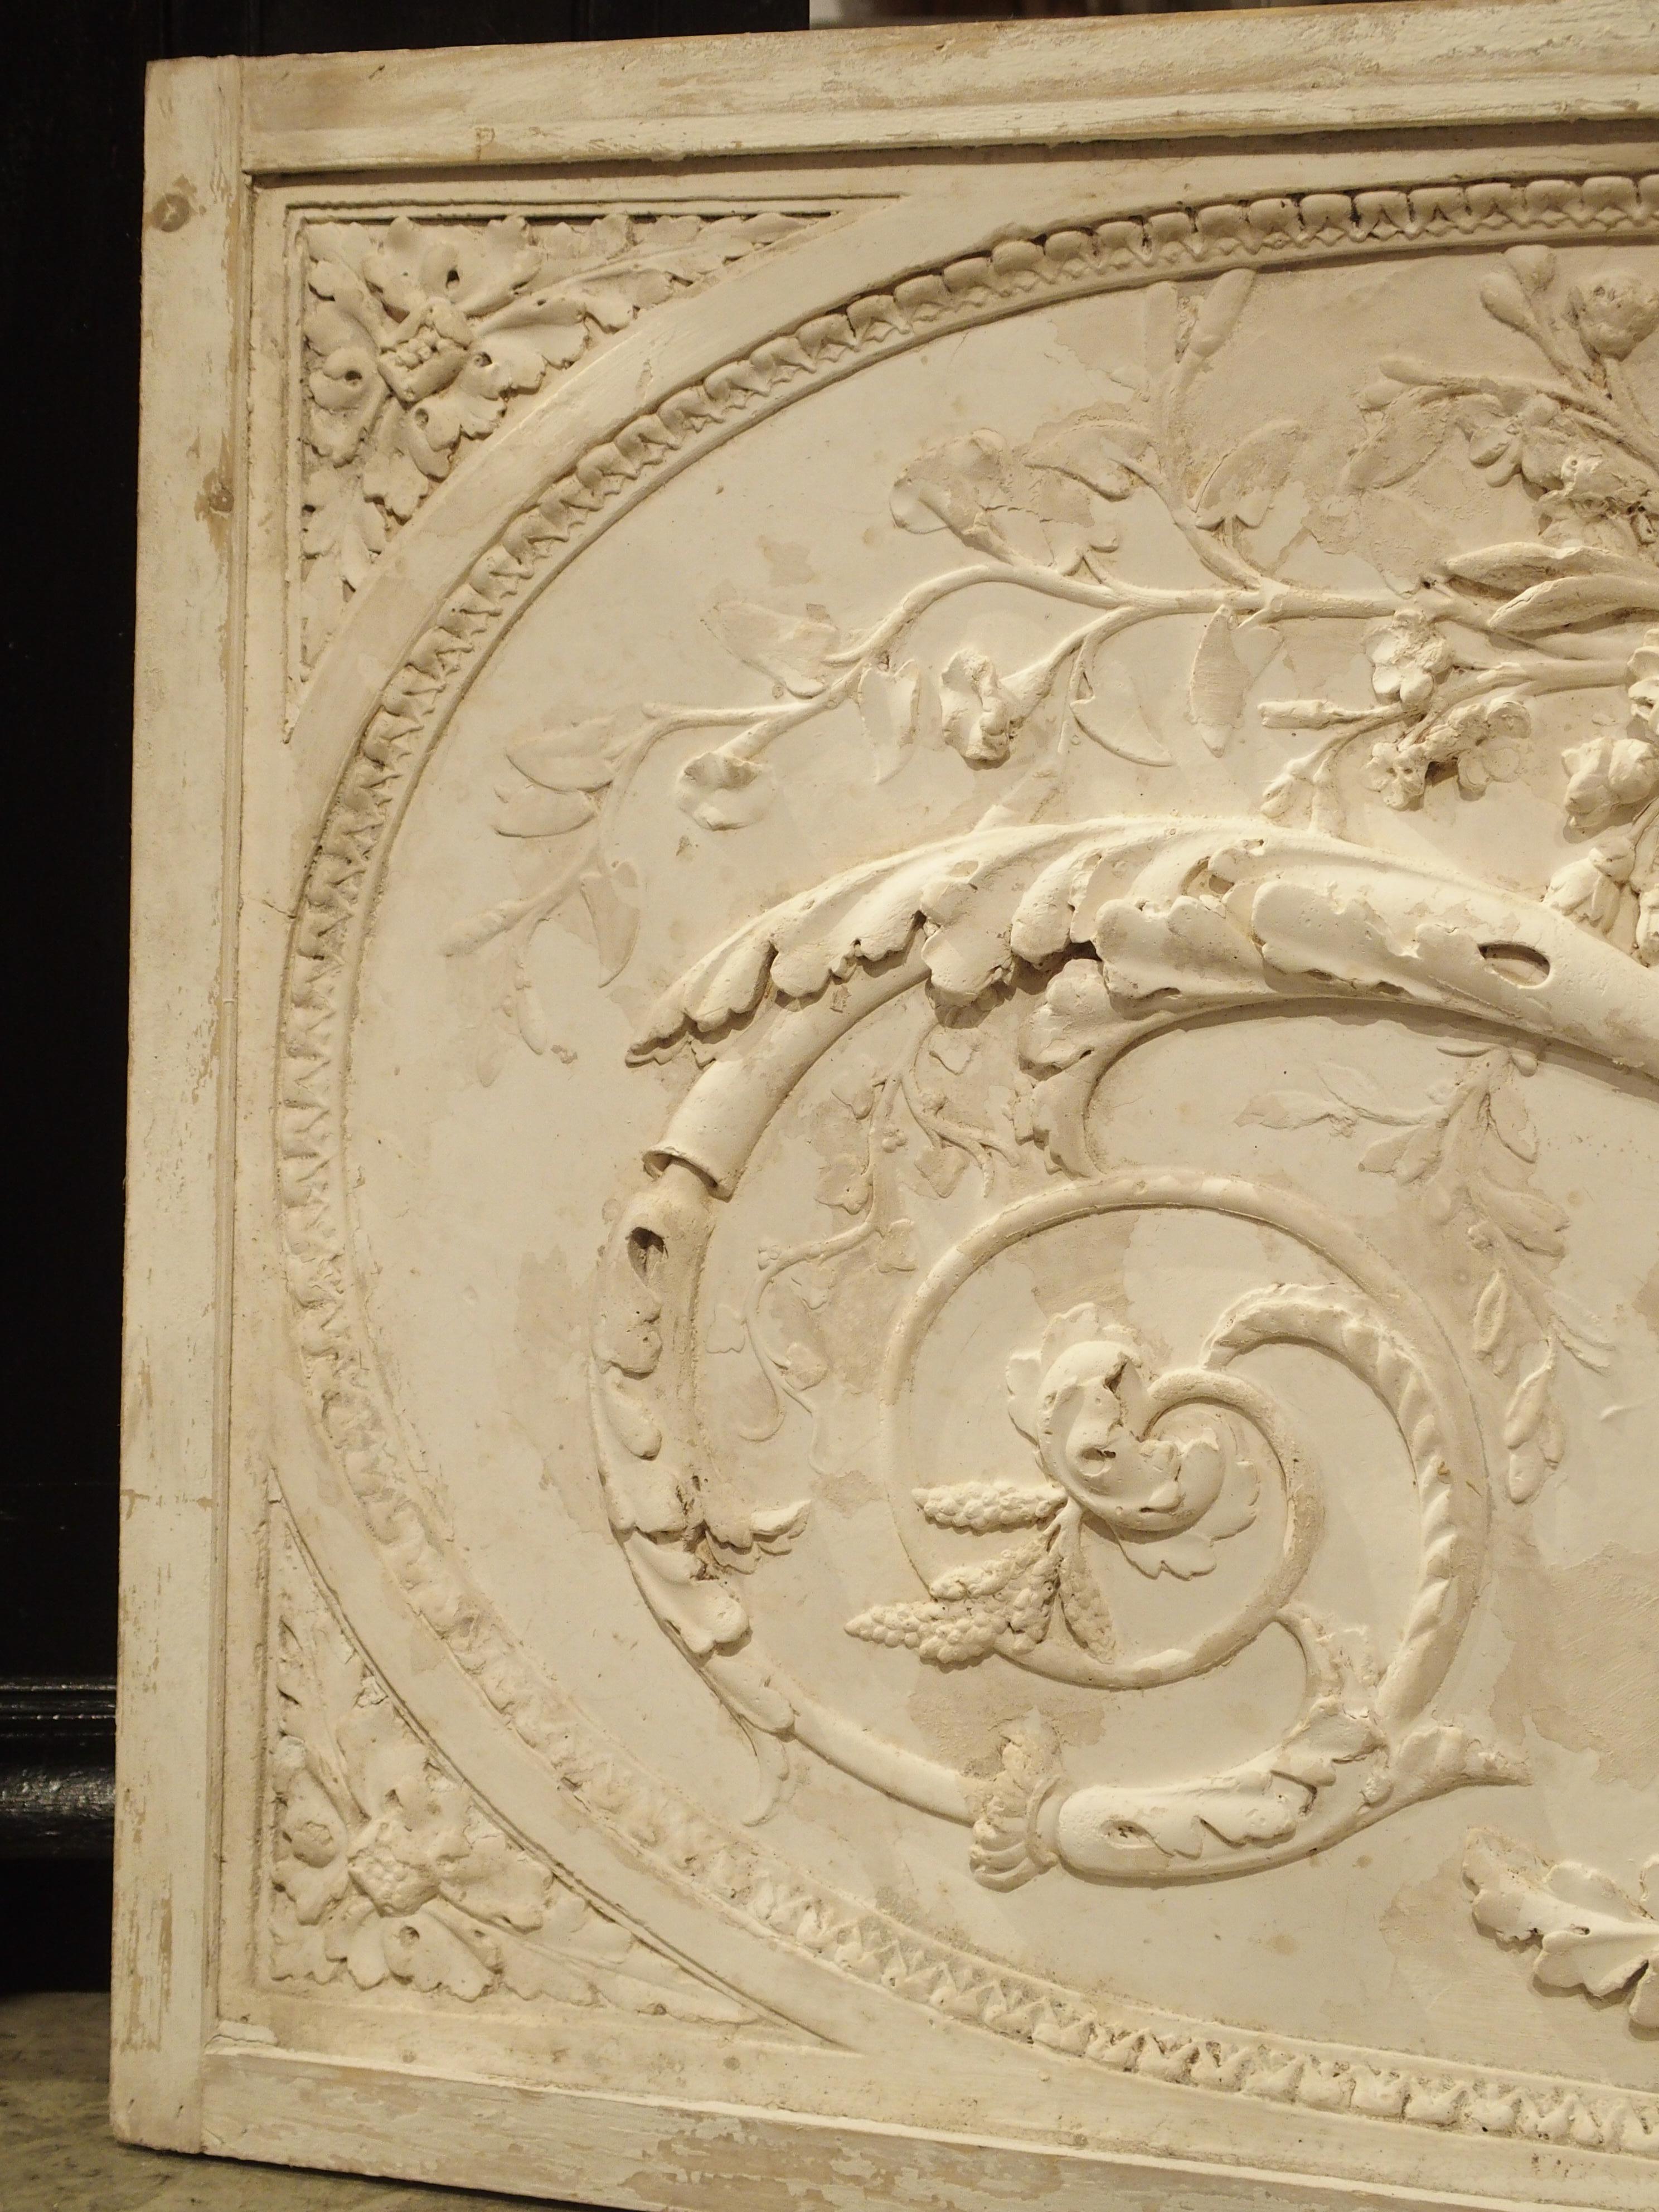 This beautiful panel is a parcel paint plaster bas relief from France. The framed plaster overdoor depicts Classic scrolling rinceau growing from a central vase. Originally, these were placed over doors in French paneled rooms. Today, they can still